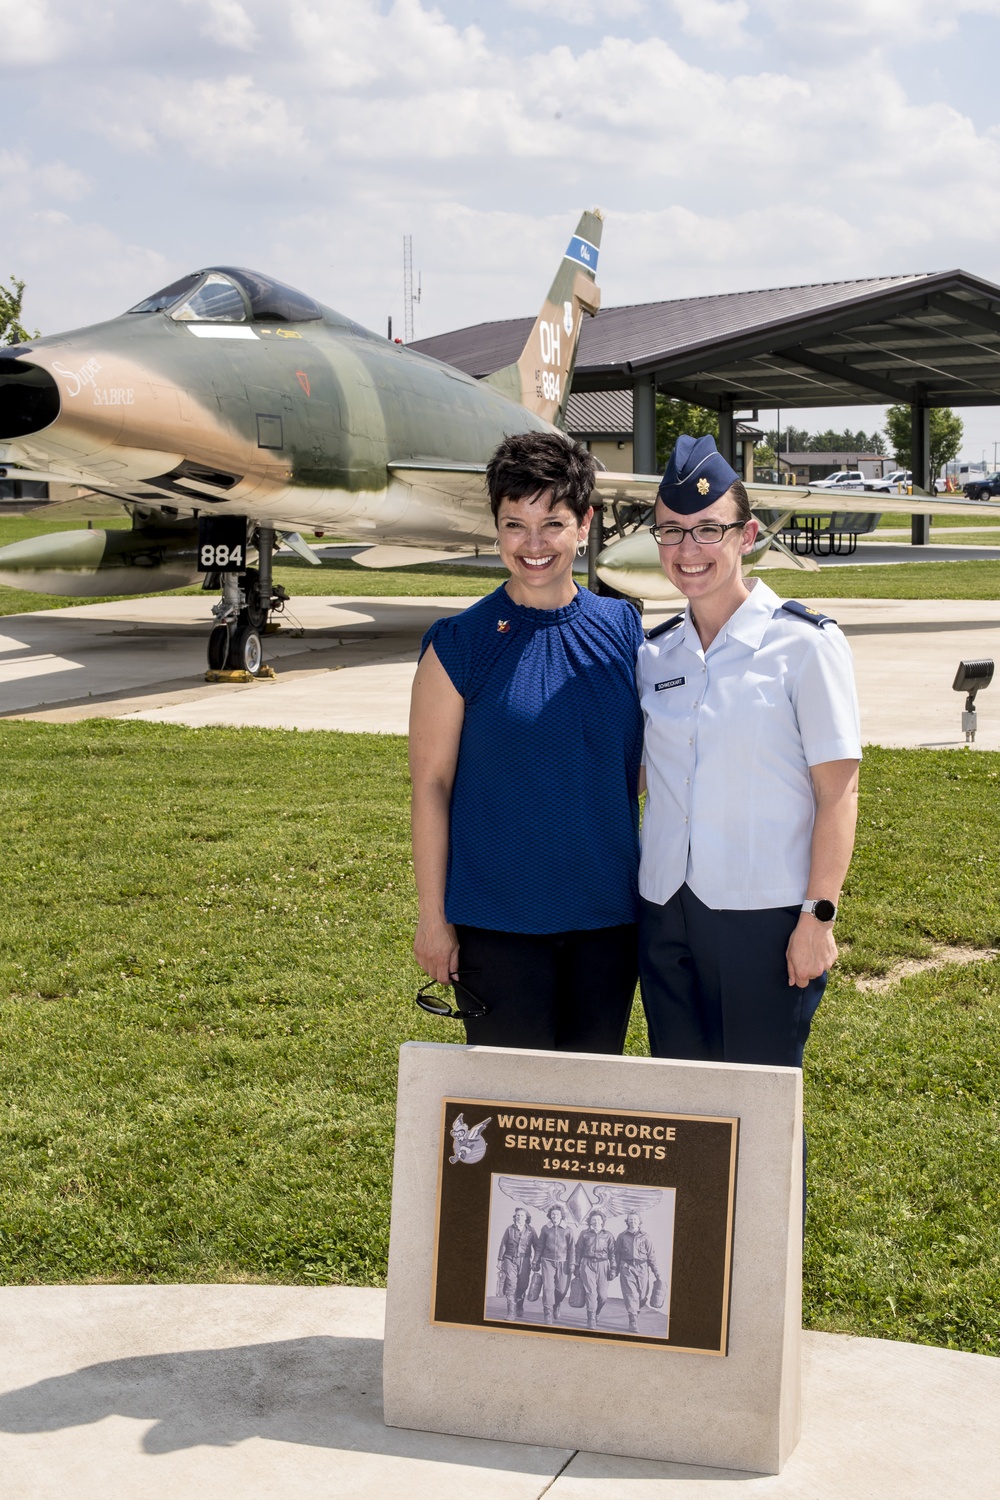 Remembering the Women Airforce Service Pilots